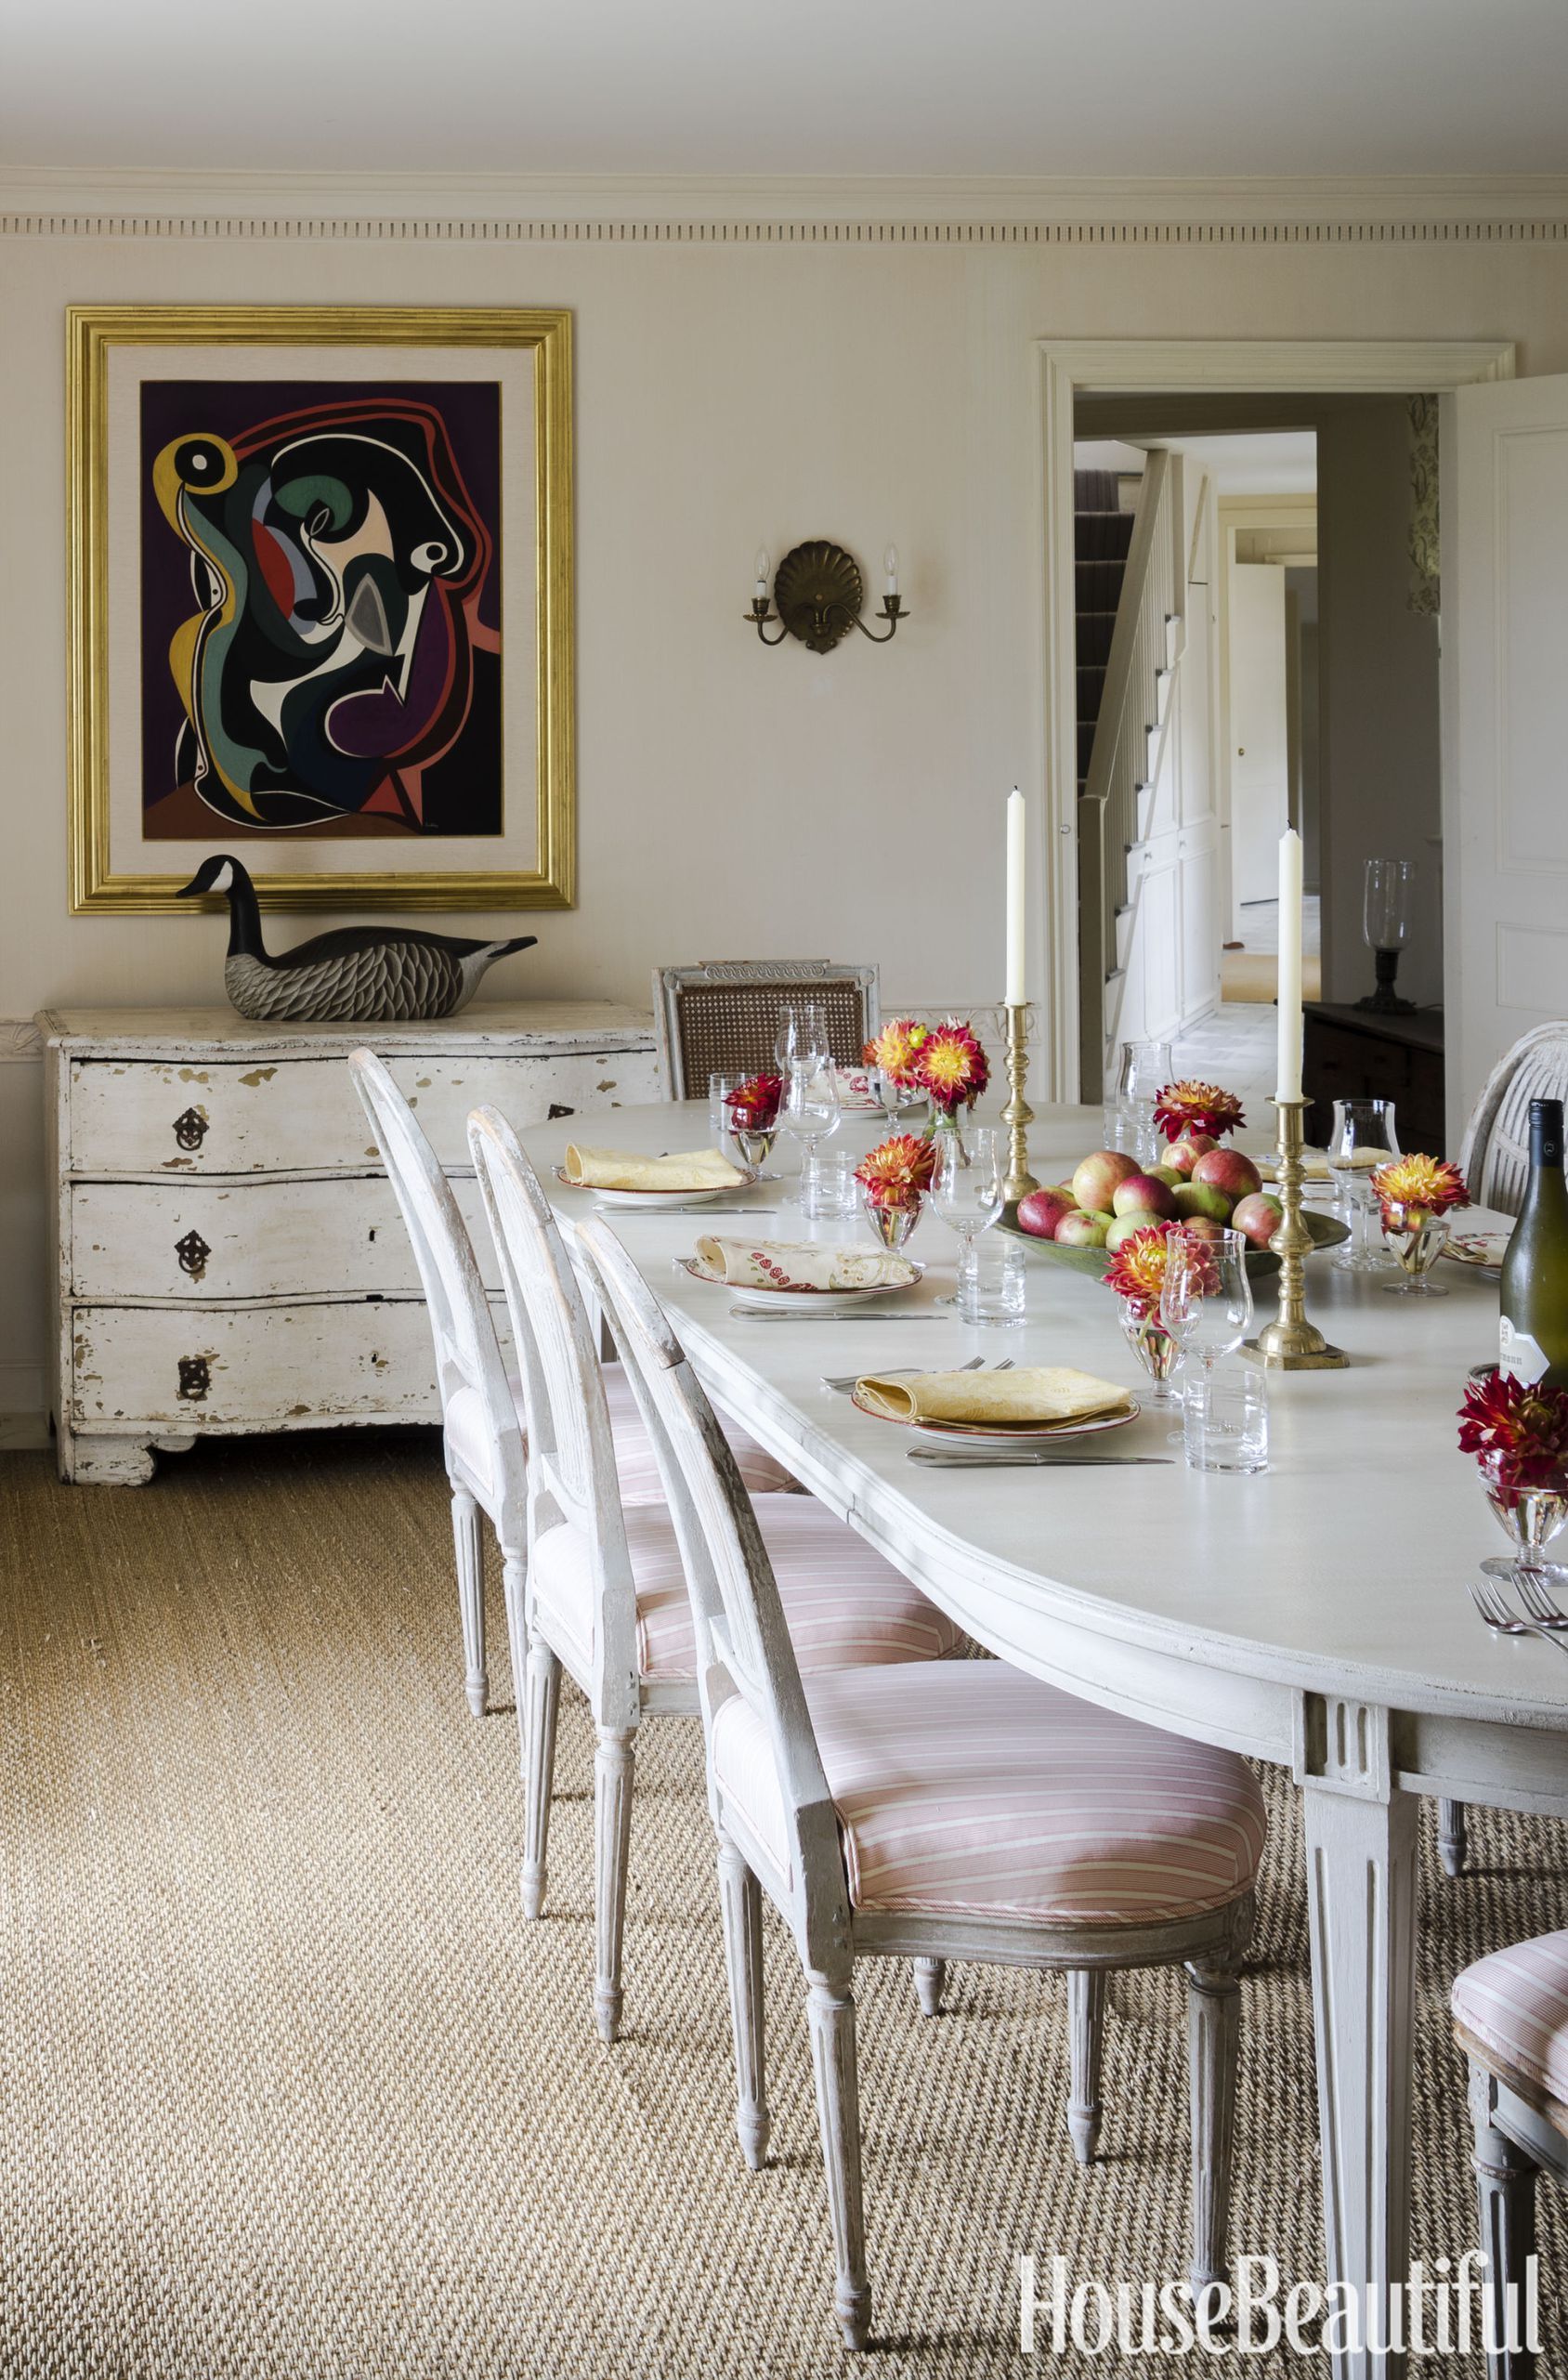 32 French Country Decor Ideas to Give Your Home Provencal Flair